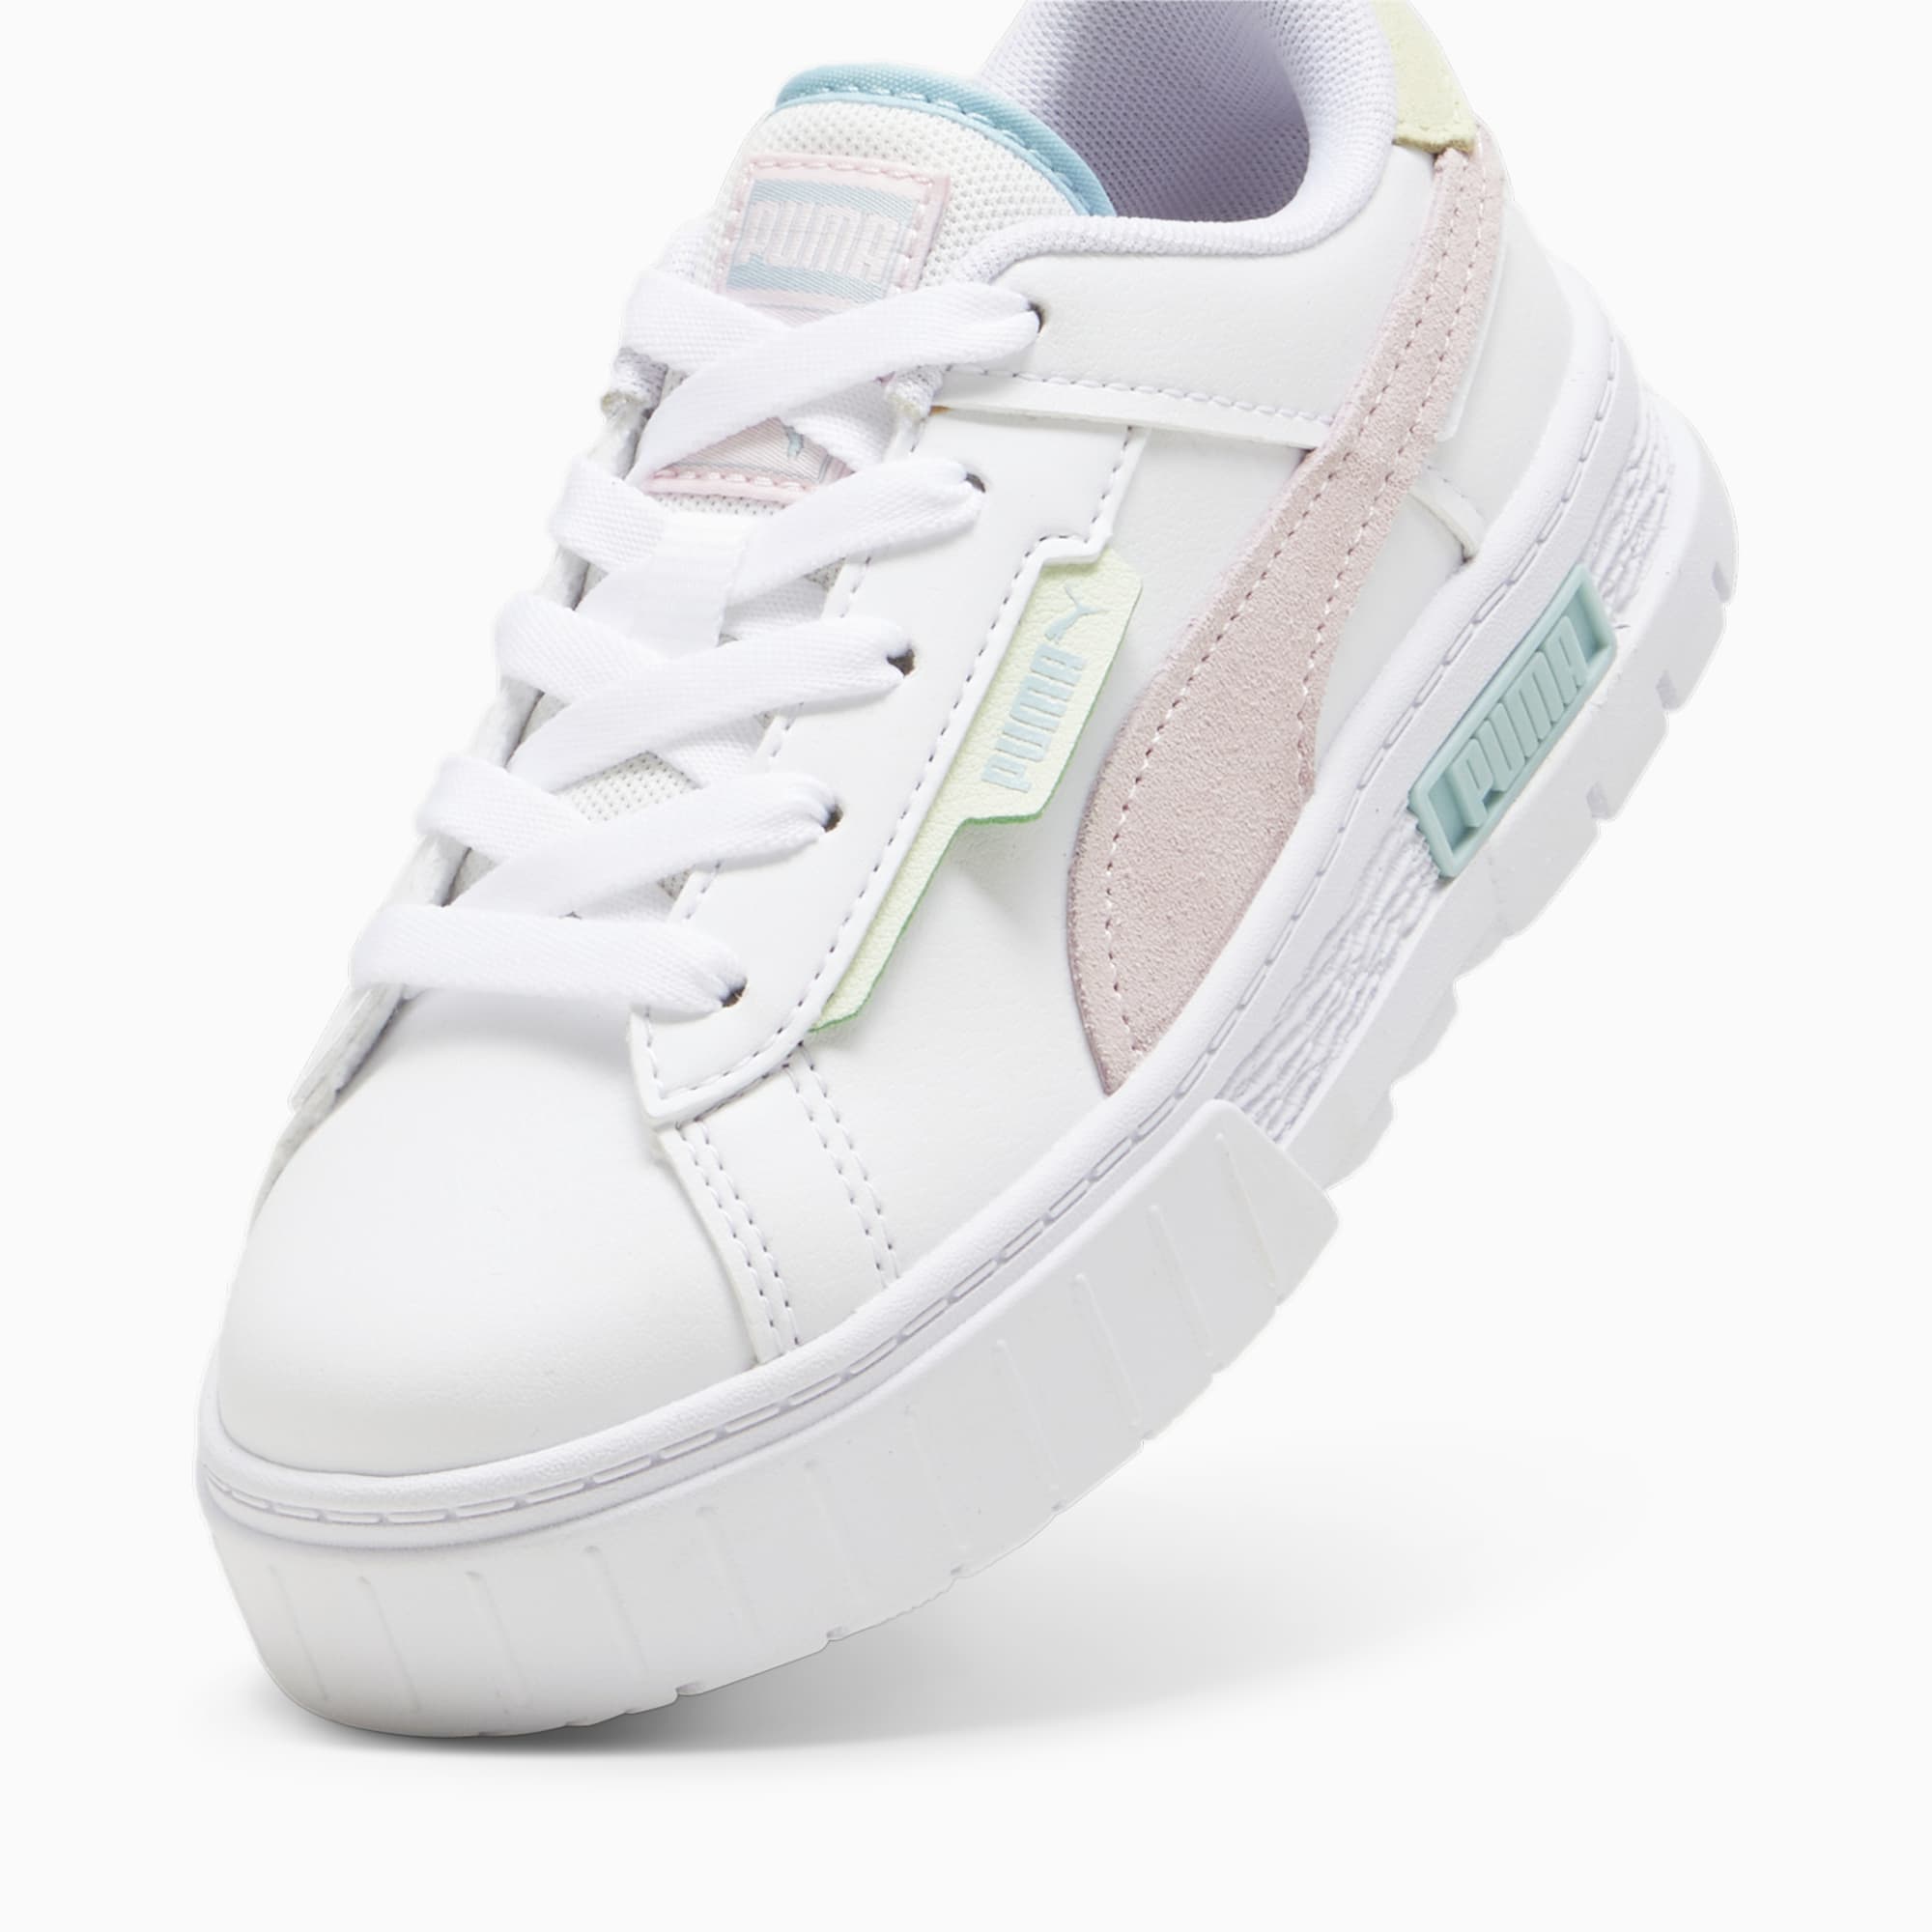 PUMA Mayze Crashed Kids' Sneakers, White/Whisp Of Pink, Size 27,5, Shoes